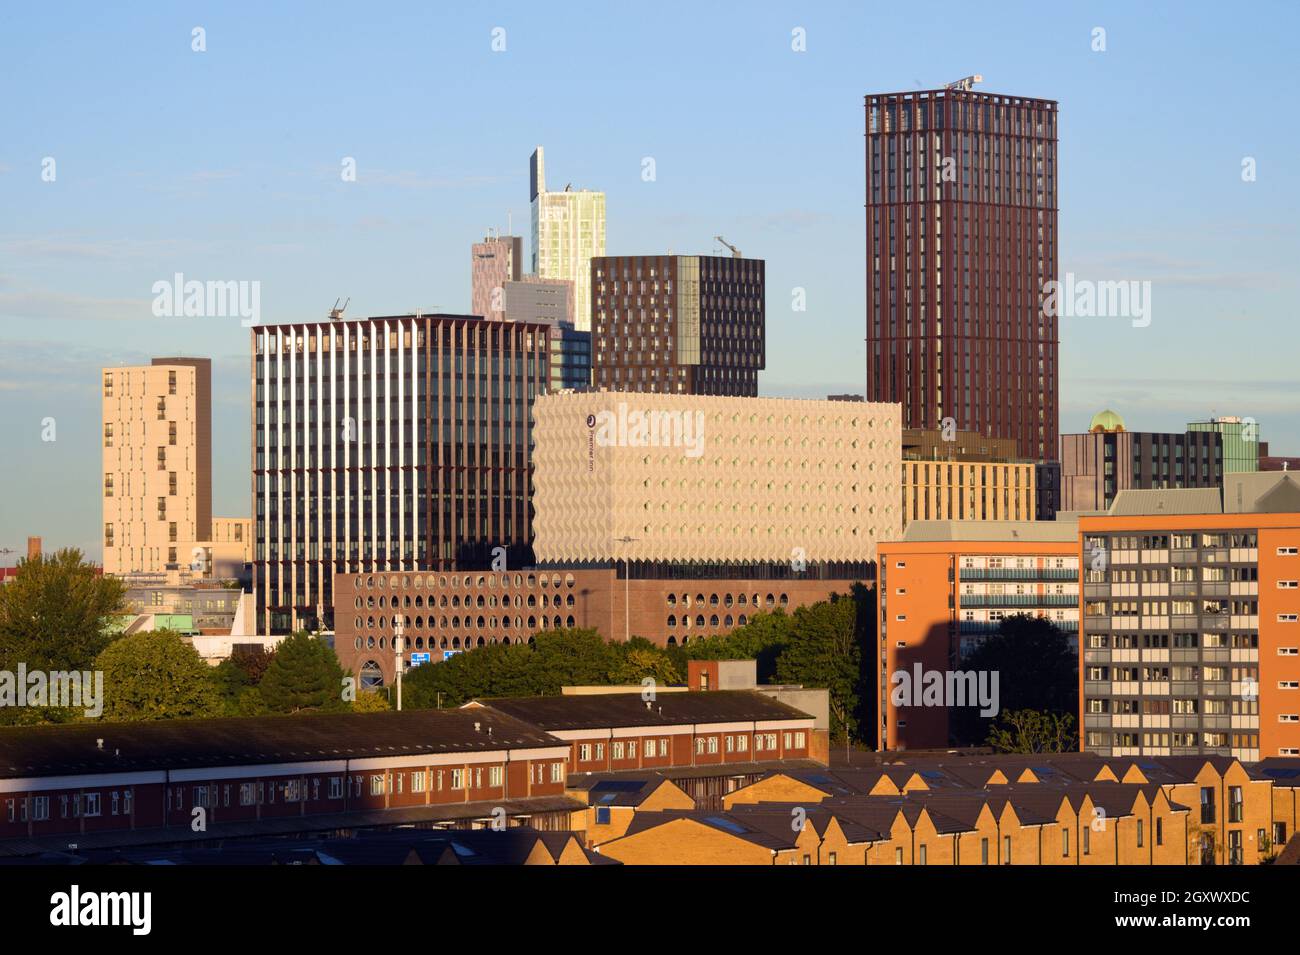 Skyscrapers or high rise buildings in central Manchester, England, United Kingdom, seen from the South of the city. Stock Photo